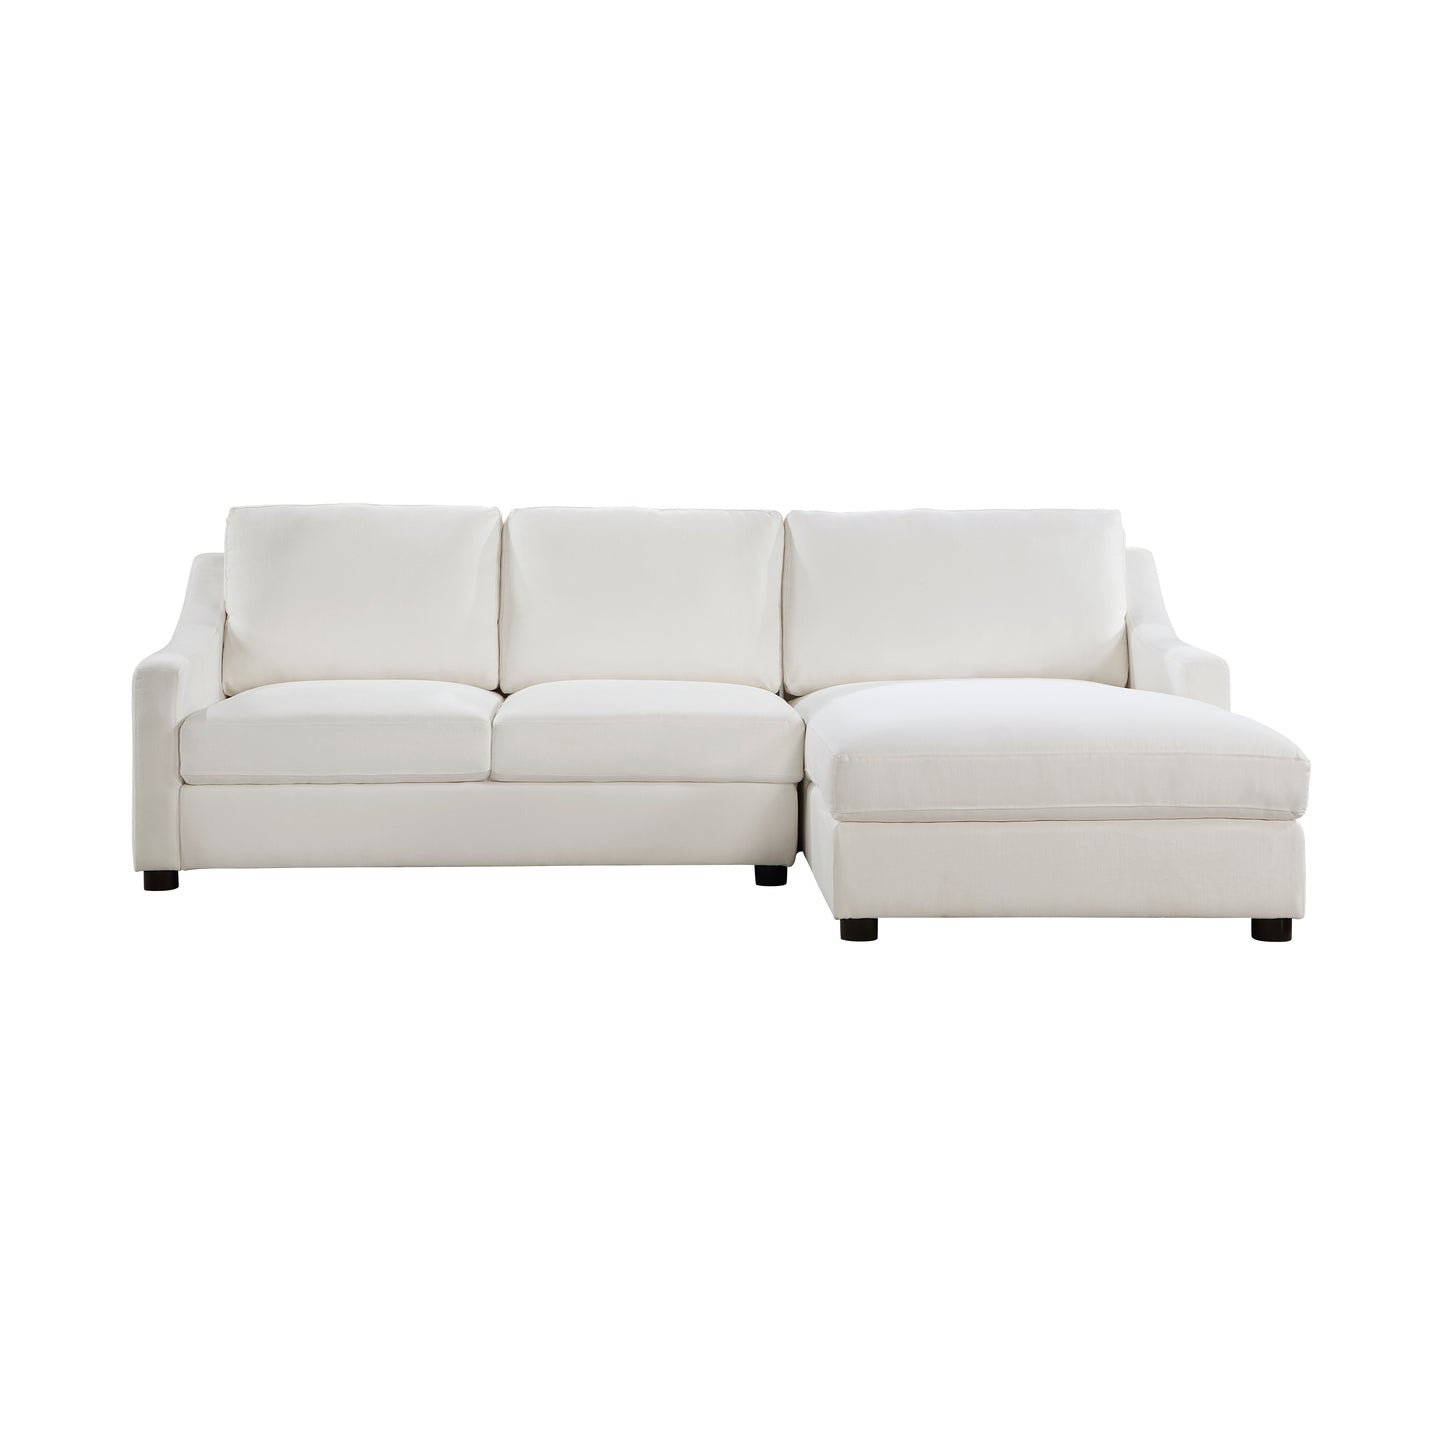 Zayden 2 PCS Sectional RAF ONLY CREAM ONLY